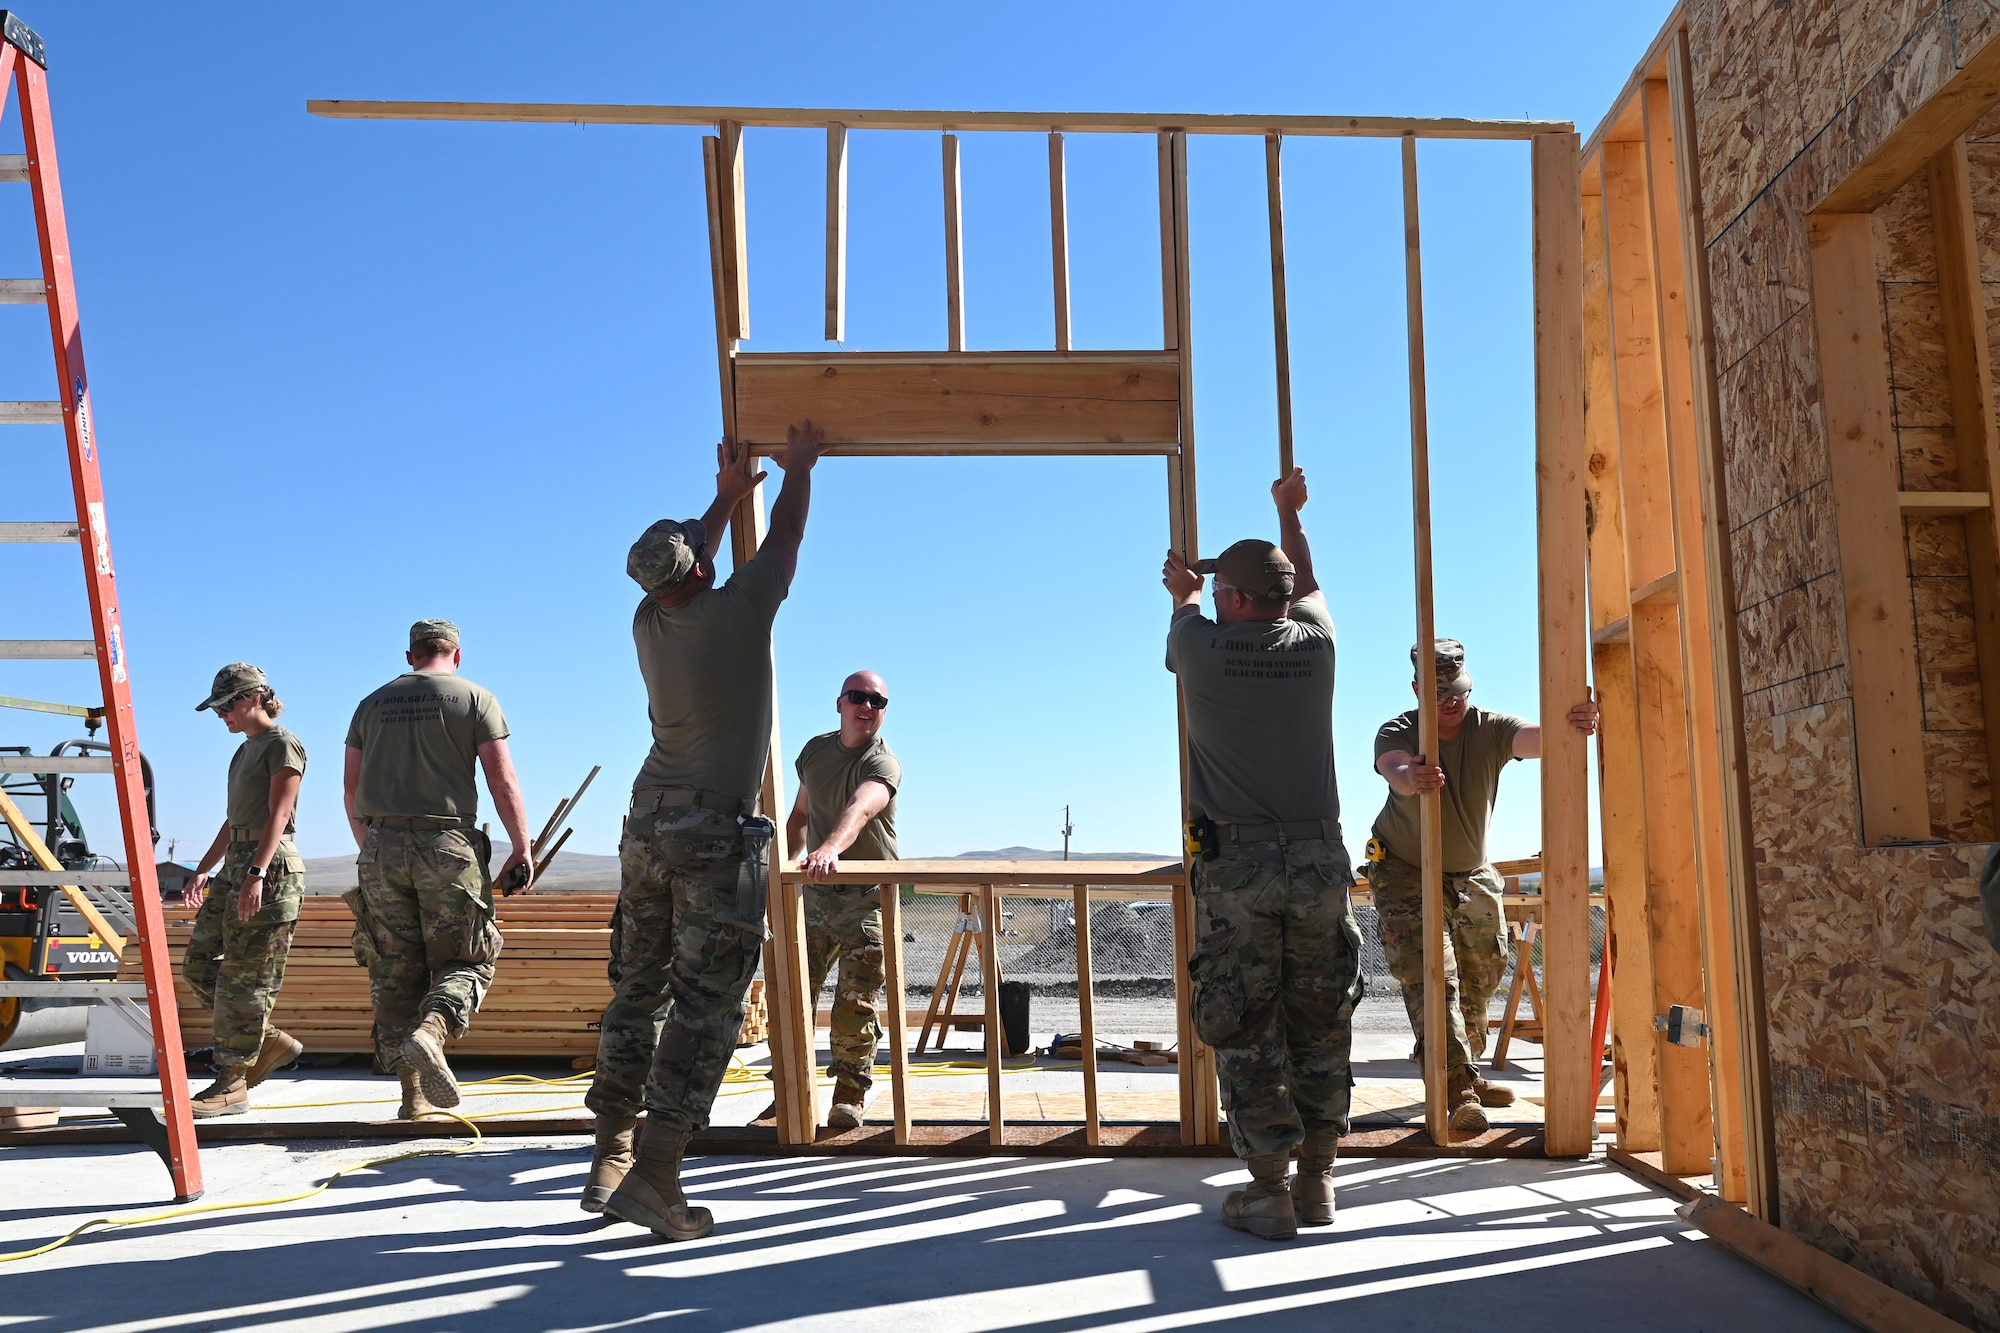 U.S. Air Force Airmen assigned to the 169th Civil Engineering Squadron from the South Carolina Air National Guard, utilize construction tools to help build a community center for the Blackfeet Nation Native Americans at Heart Butte, Montana, September 6, 2022. This temporary deployment is part of the 169th Civil Engineer Squadron’s yearly Innovative Readiness Training (IRT) that helps Airmen train in a real-world environment to acquire and maintain their trade skills. (U.S. Air National Guard photo by Staff Sgt. Mackenzie Bacalzo, 169th Fighter Wing Public Affairs)